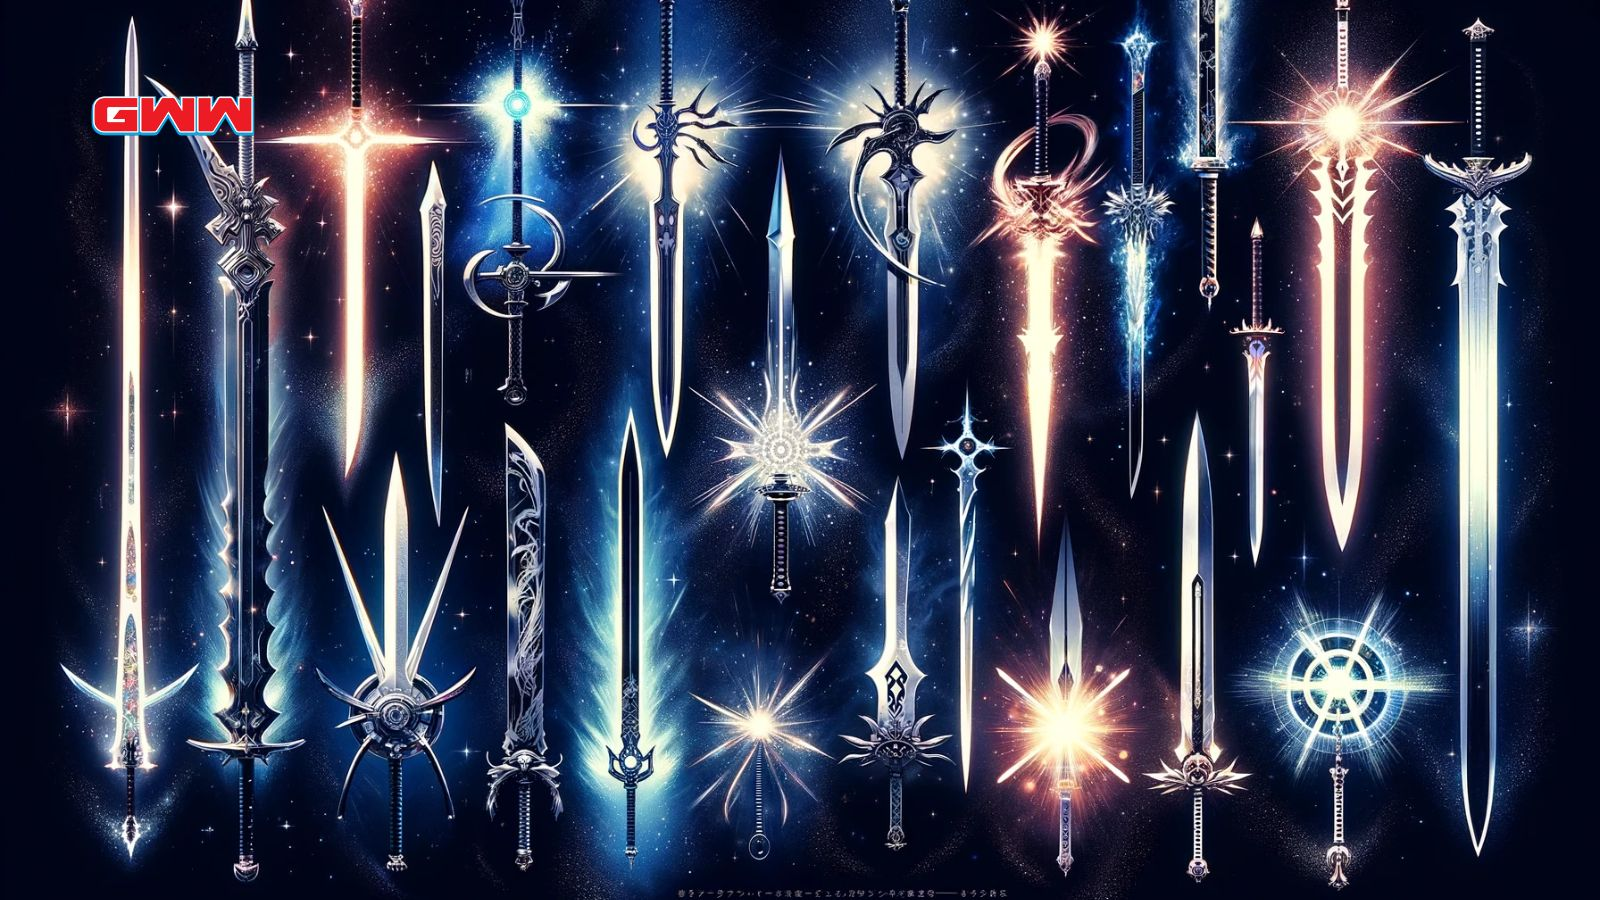 Anime swords montage with cosmic background and glowing effects